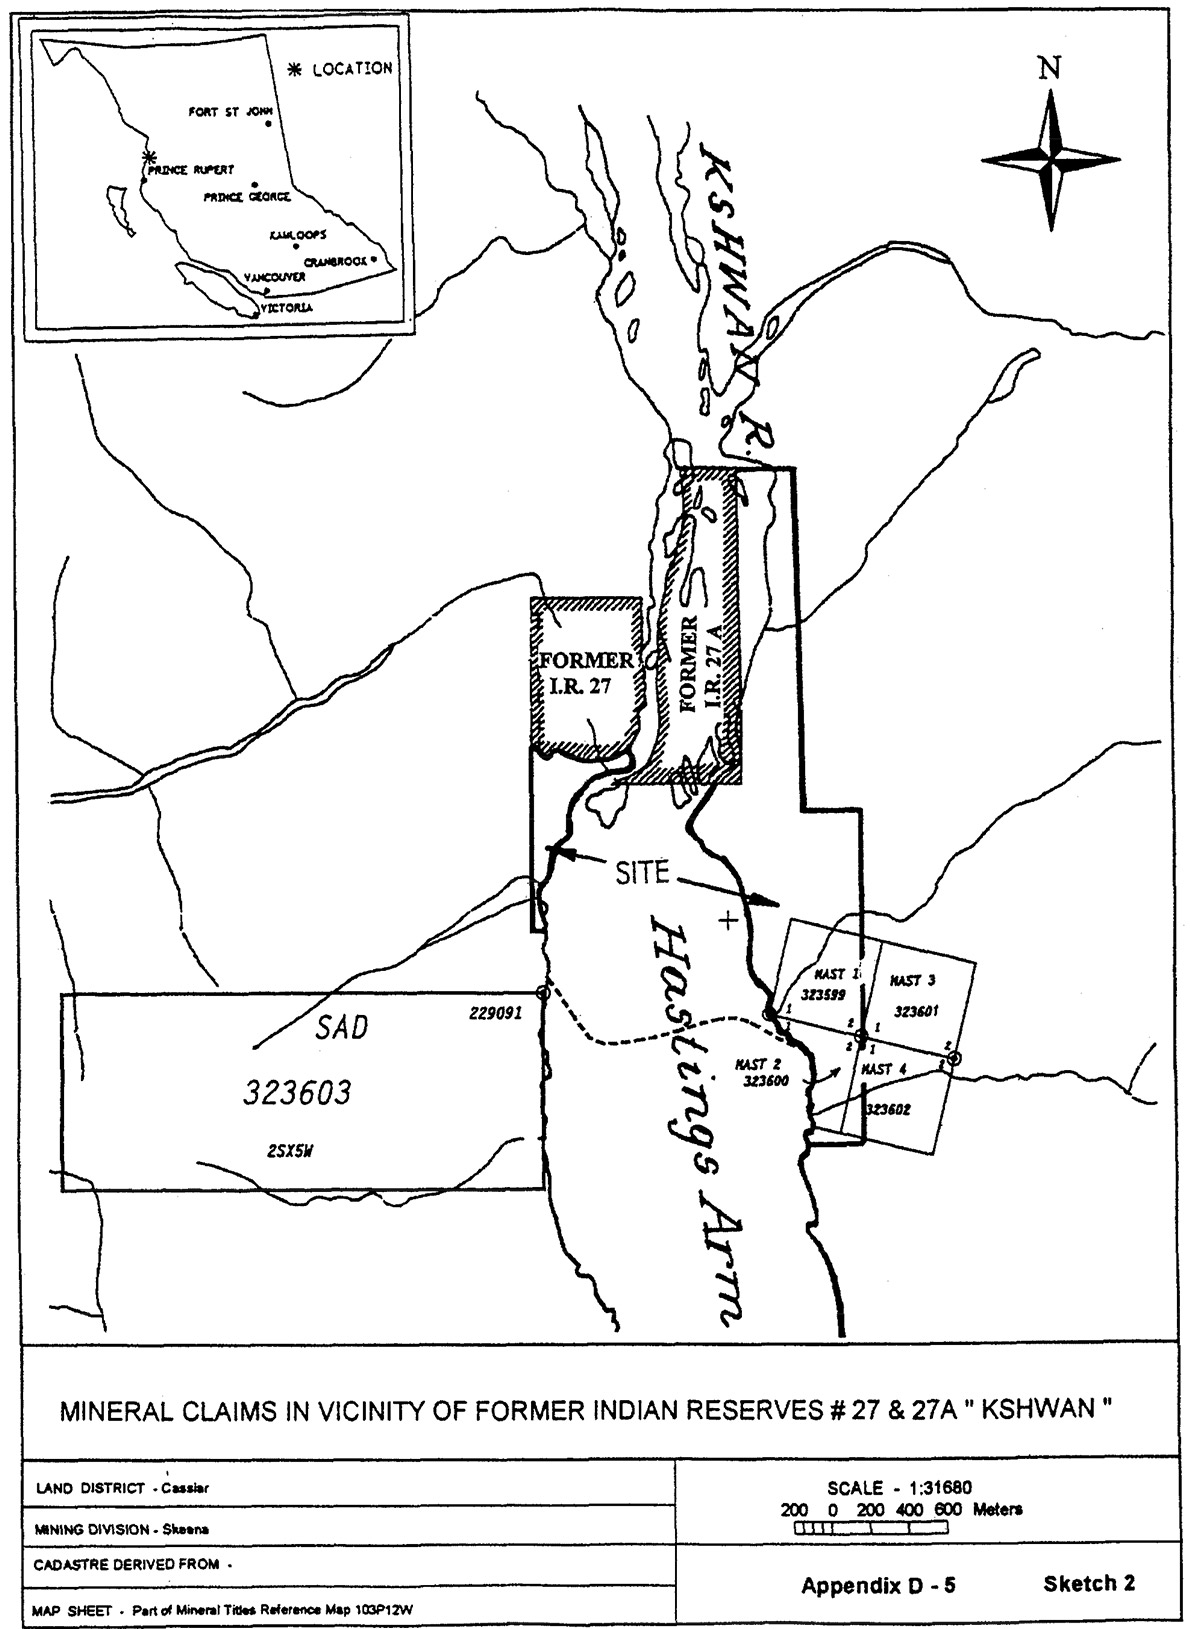 Mineral Claims in vicinity of former Indian Reserve No.s 27 and 27A "Kshwan"